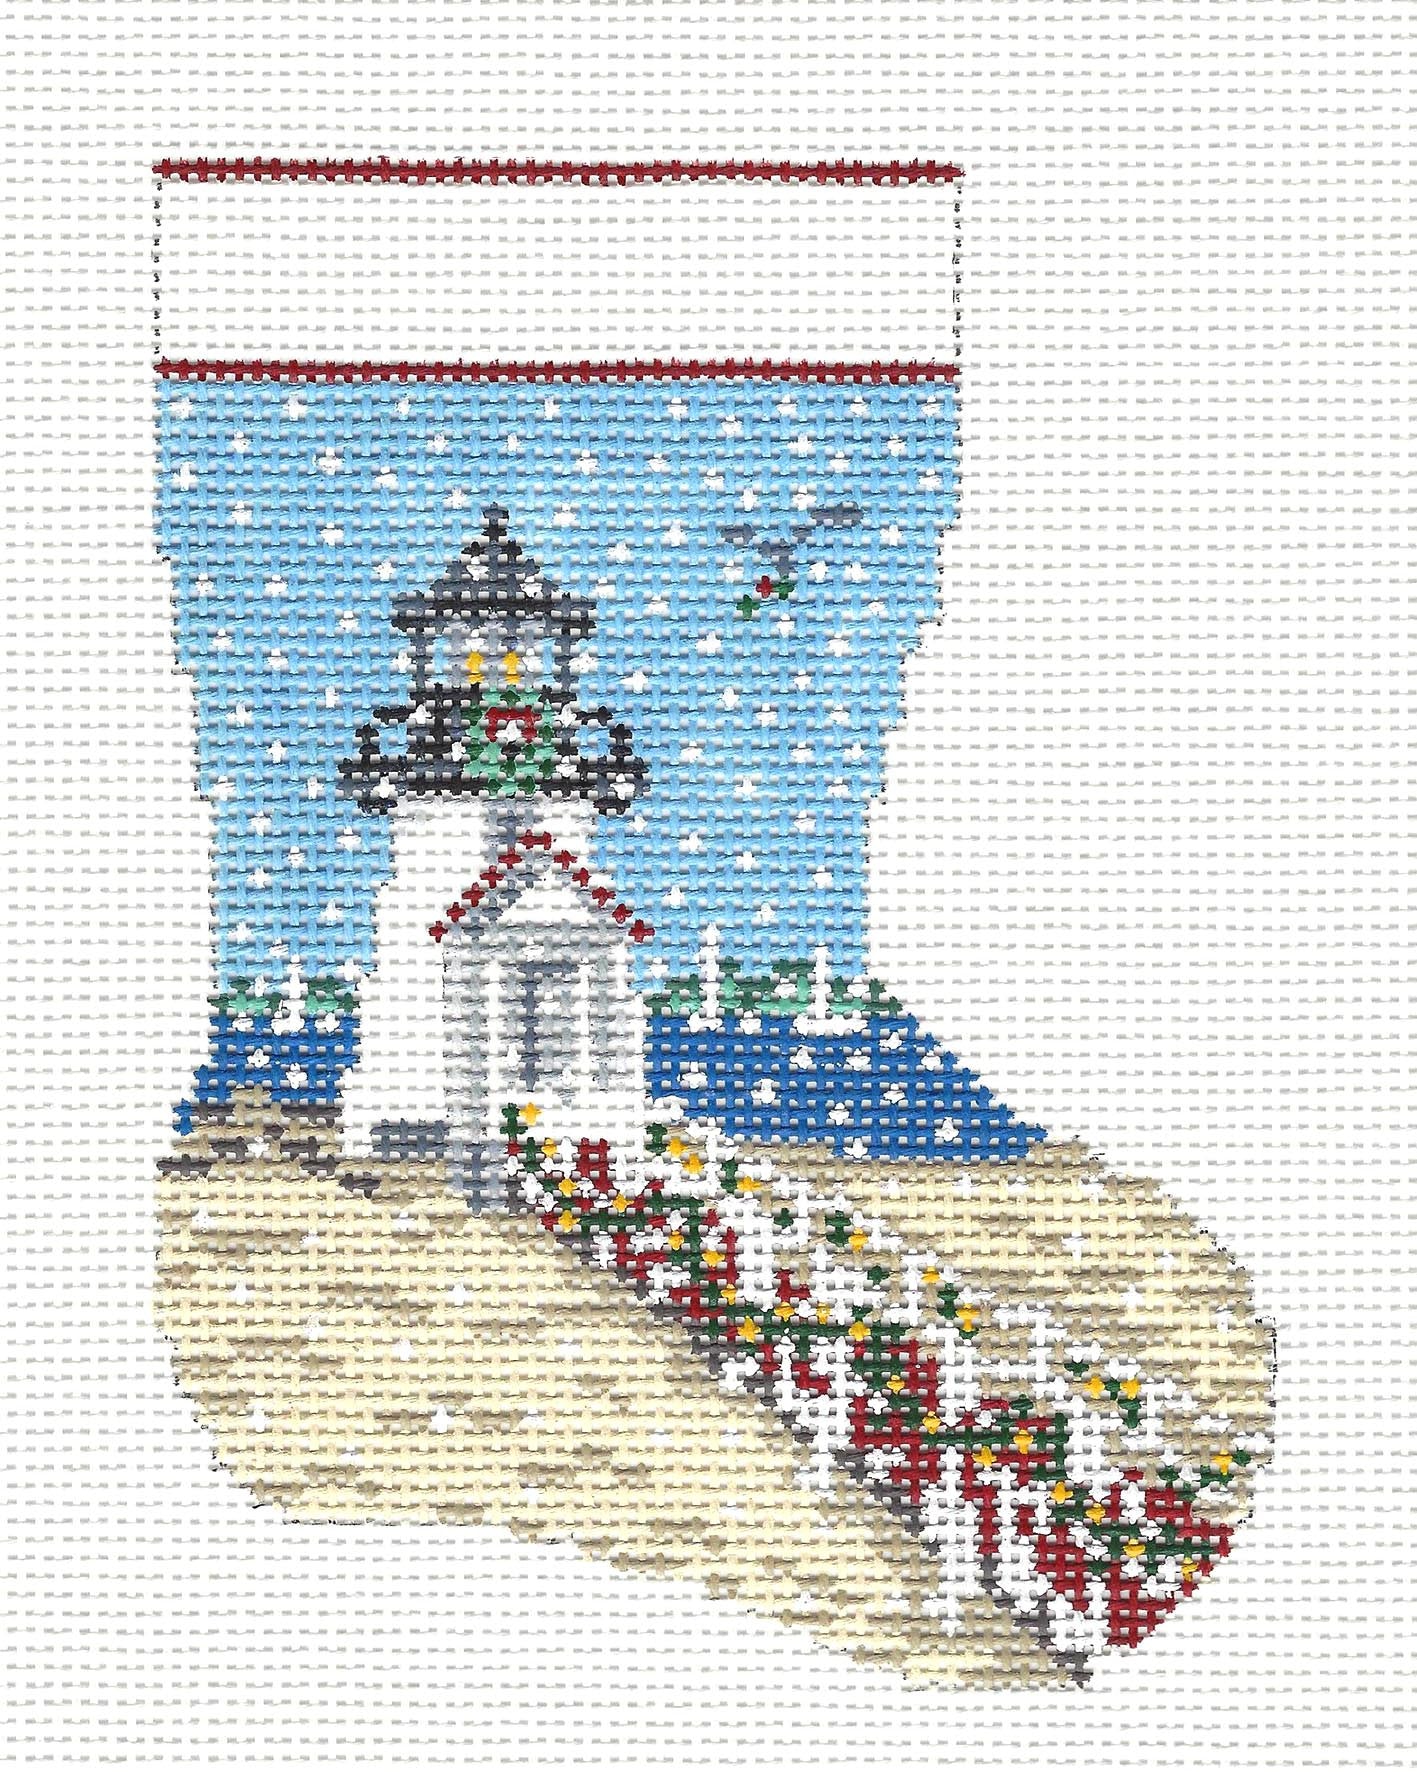 Stocking~Lighthouse in Snow 13 MESH Mini handpainted Needlepoint Canvas~by Needle Crossings